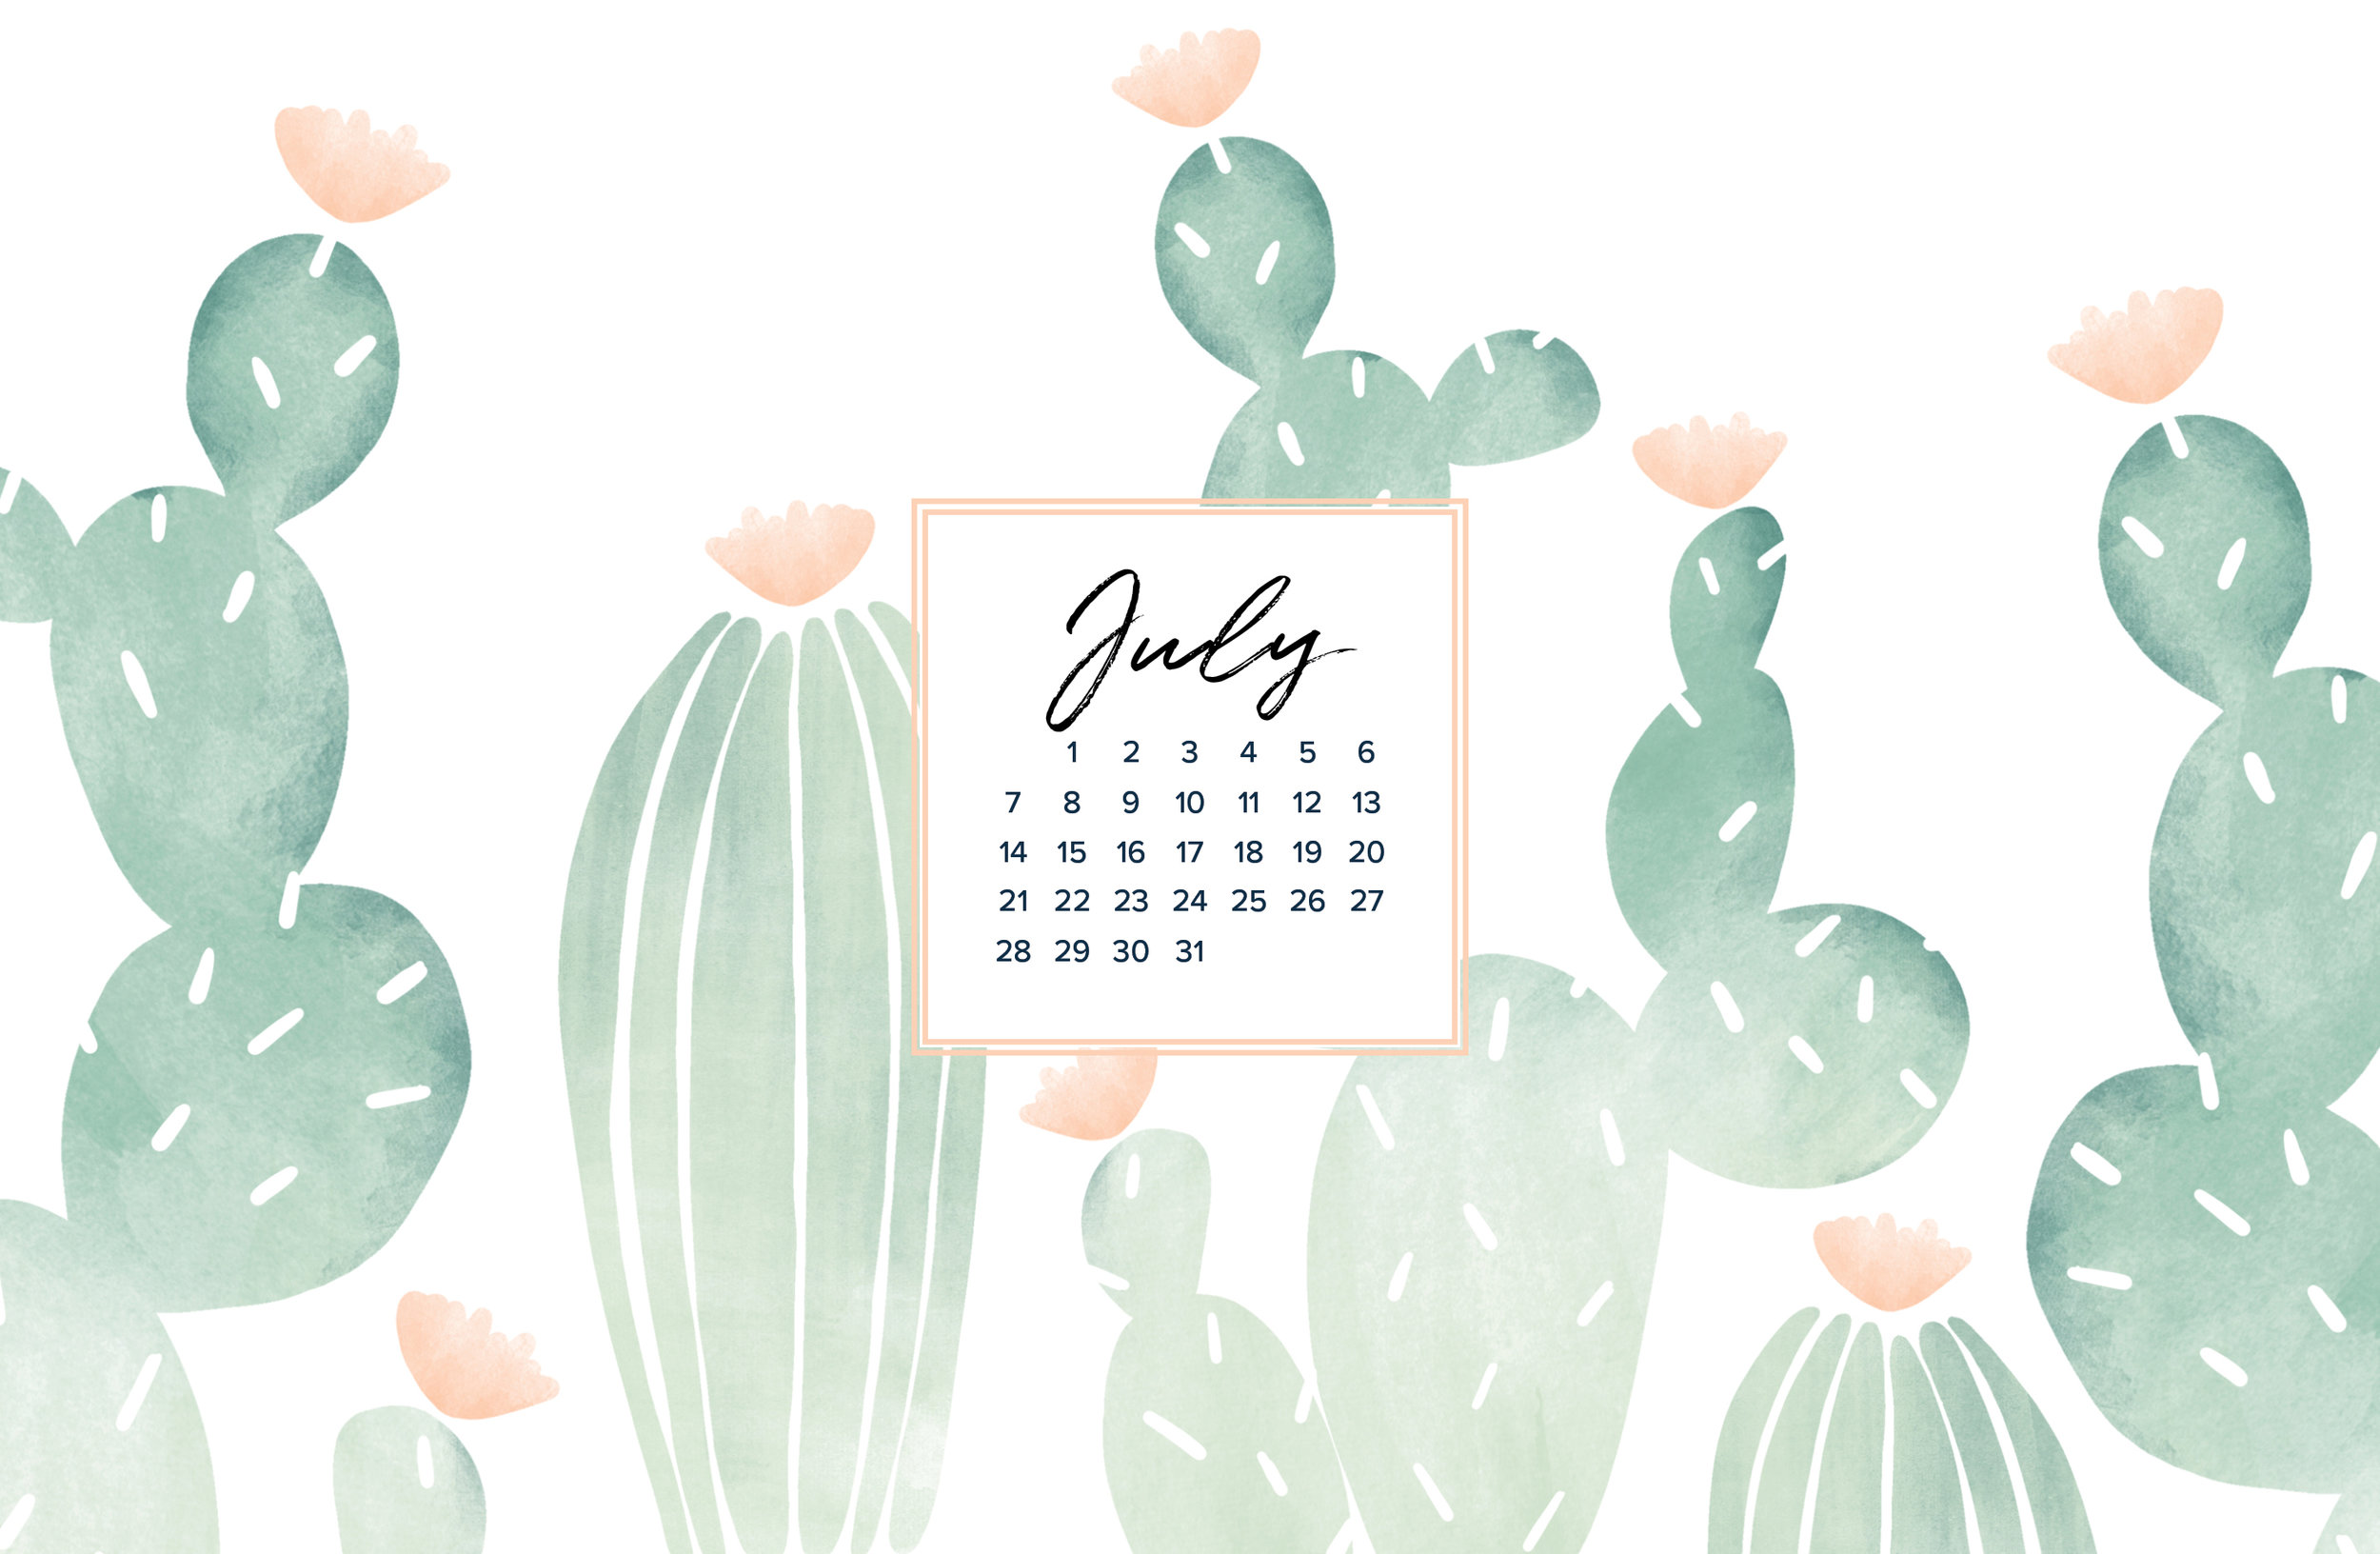 July 2021 wallpaper calendars  32 FREE cute and colorful options